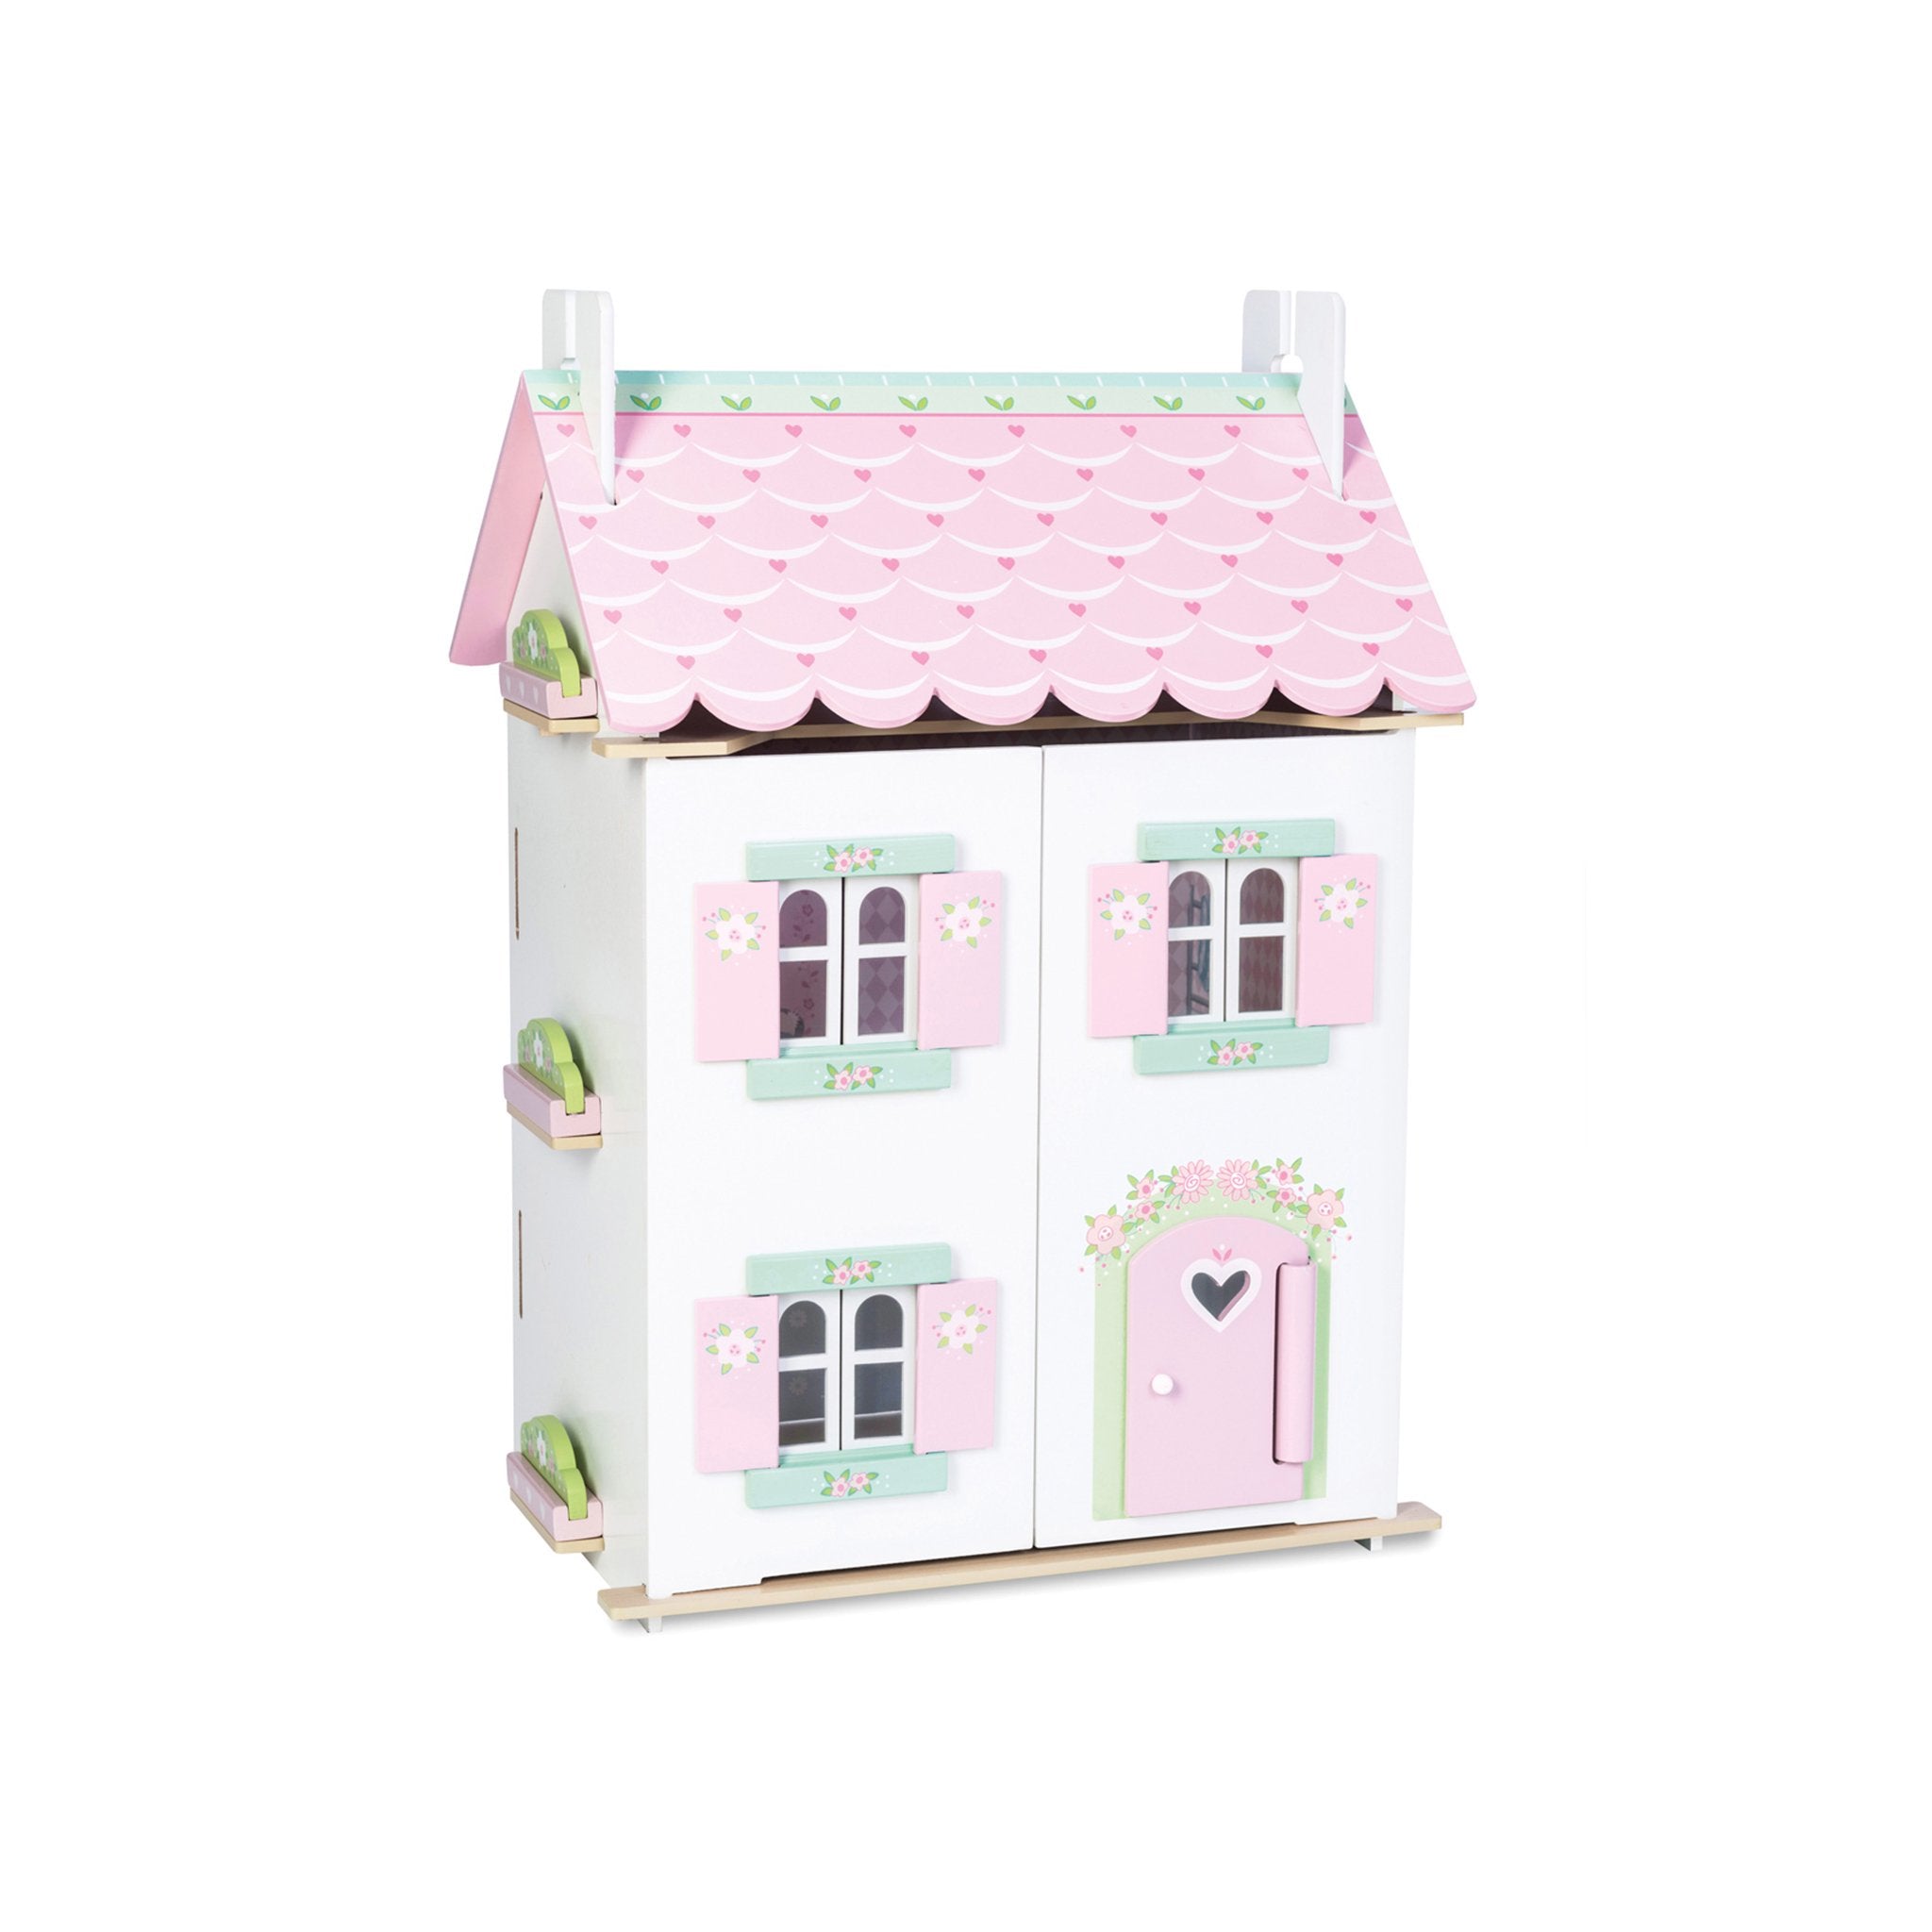 Sweetheart Cottage Wooden Dolls House 